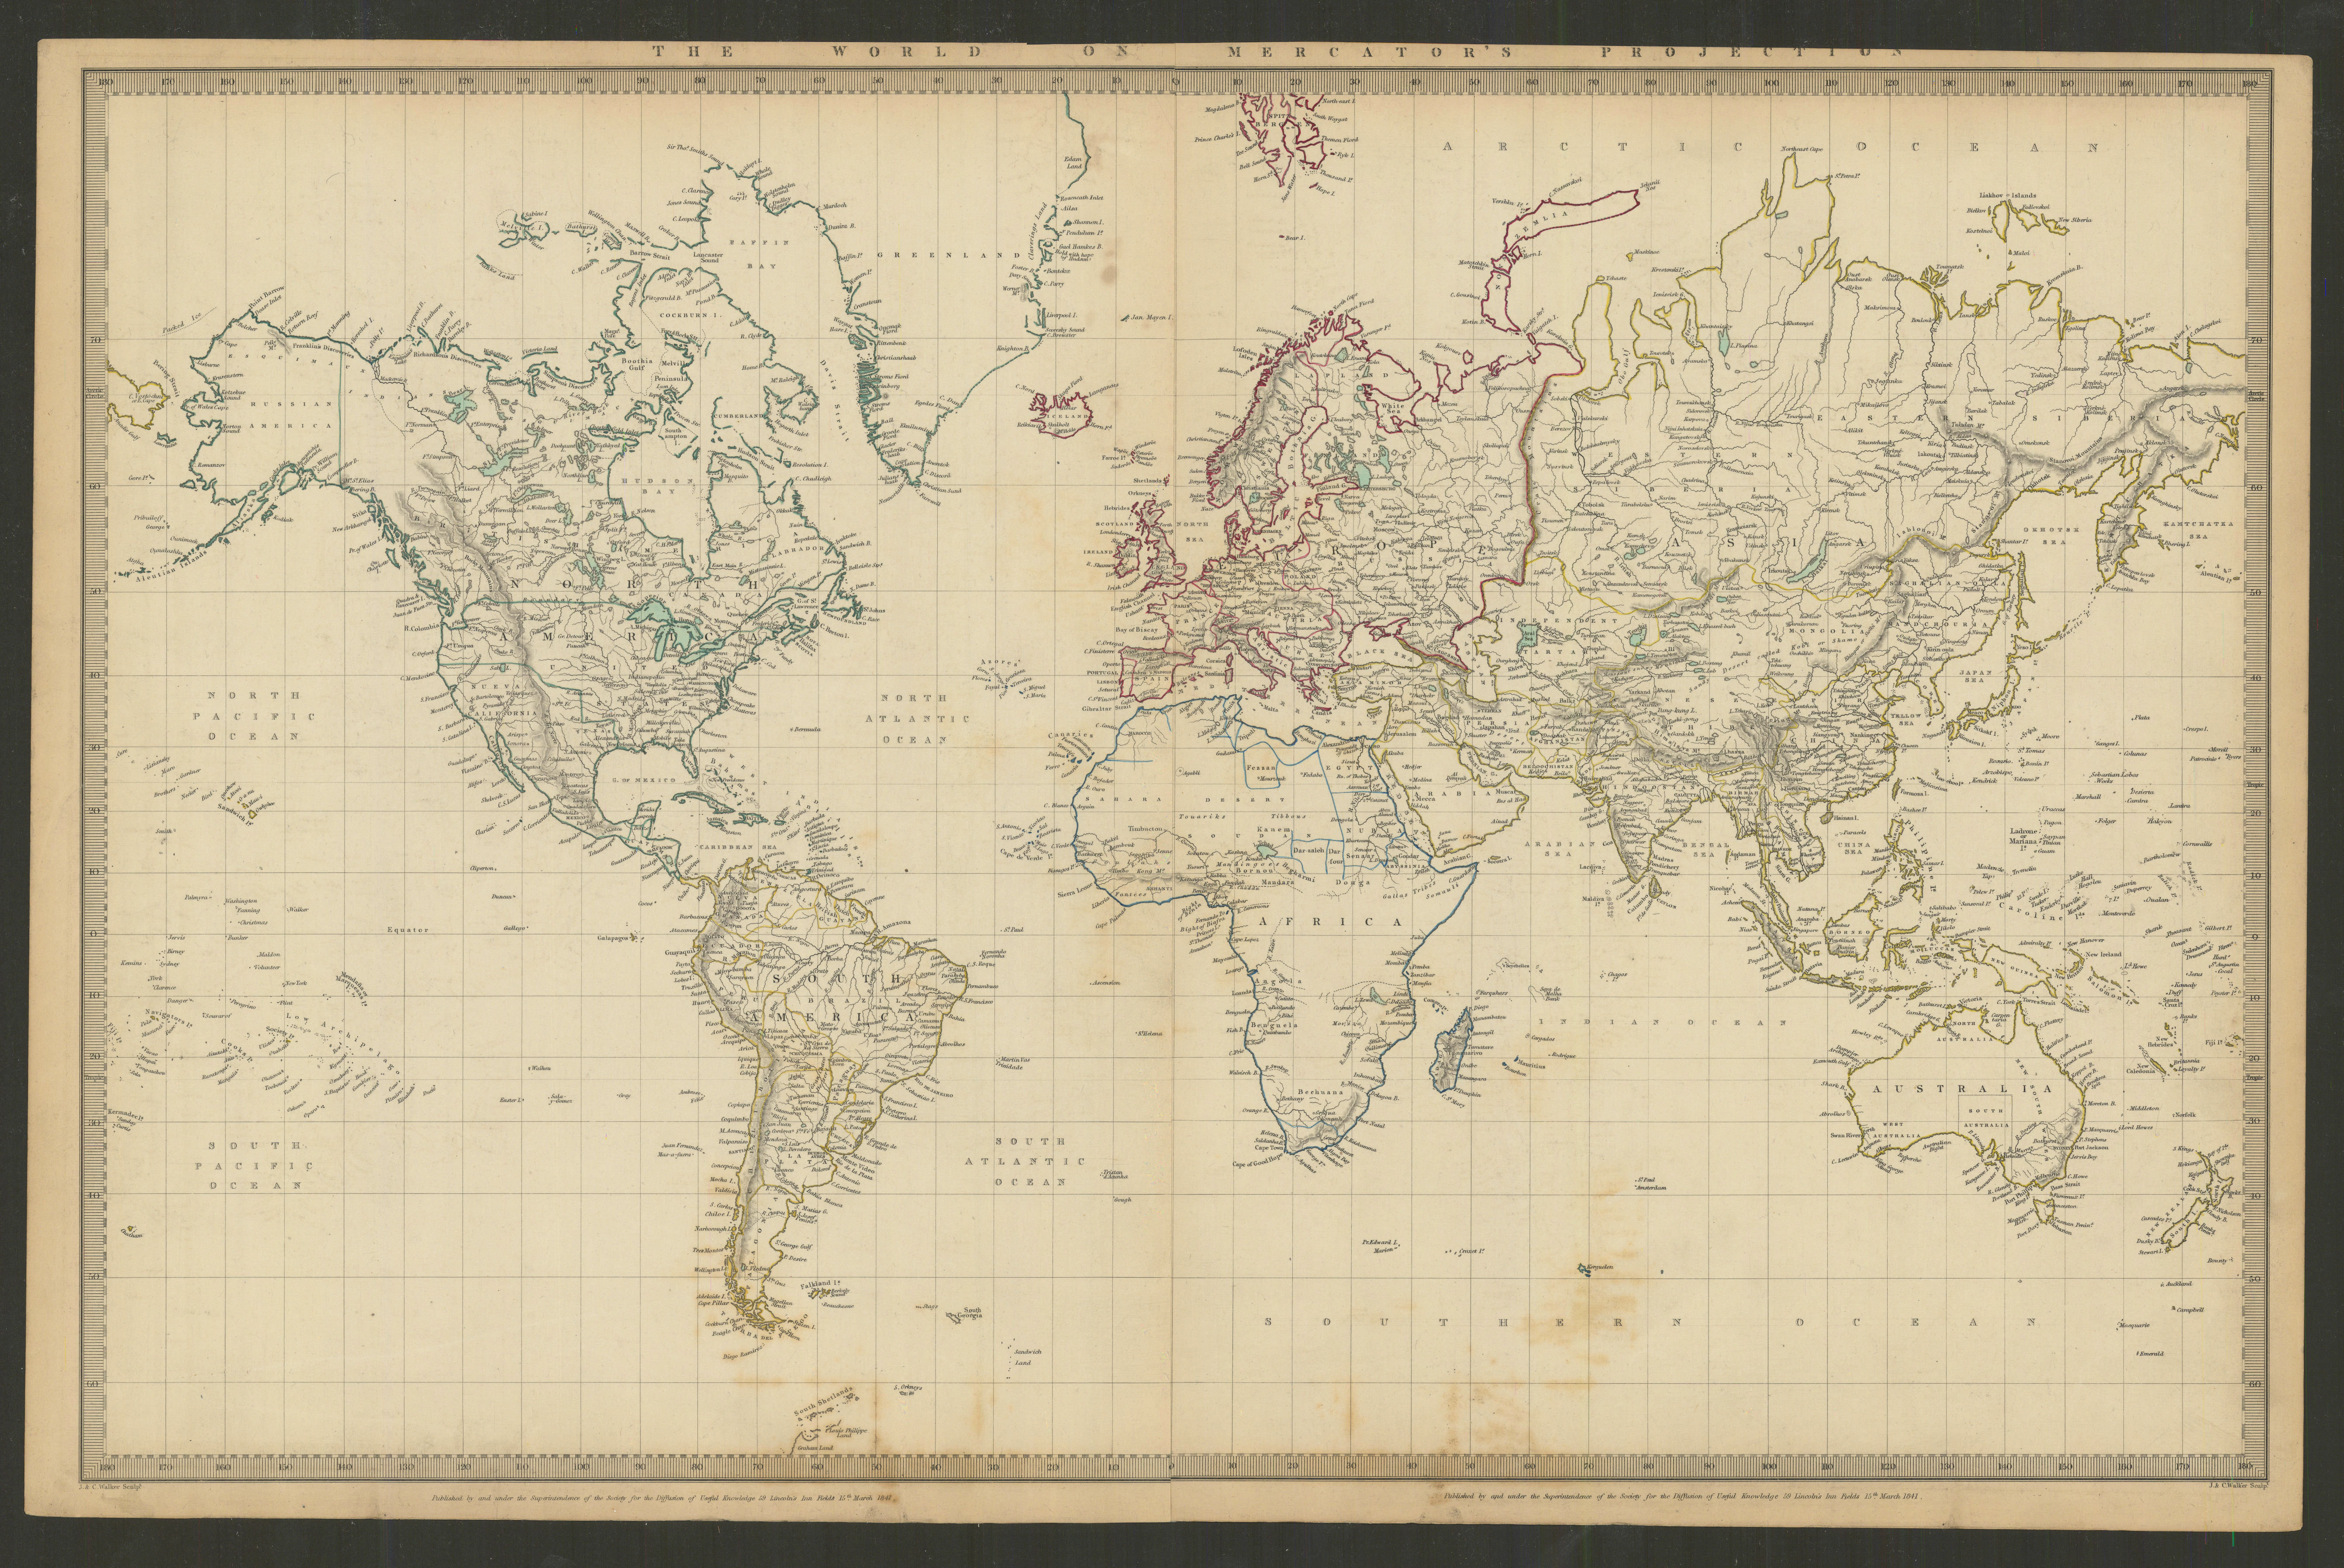 WORLD ON MERCATOR'S PROJECTION. Pre-Mexican-American war. SDUK 1844 old map